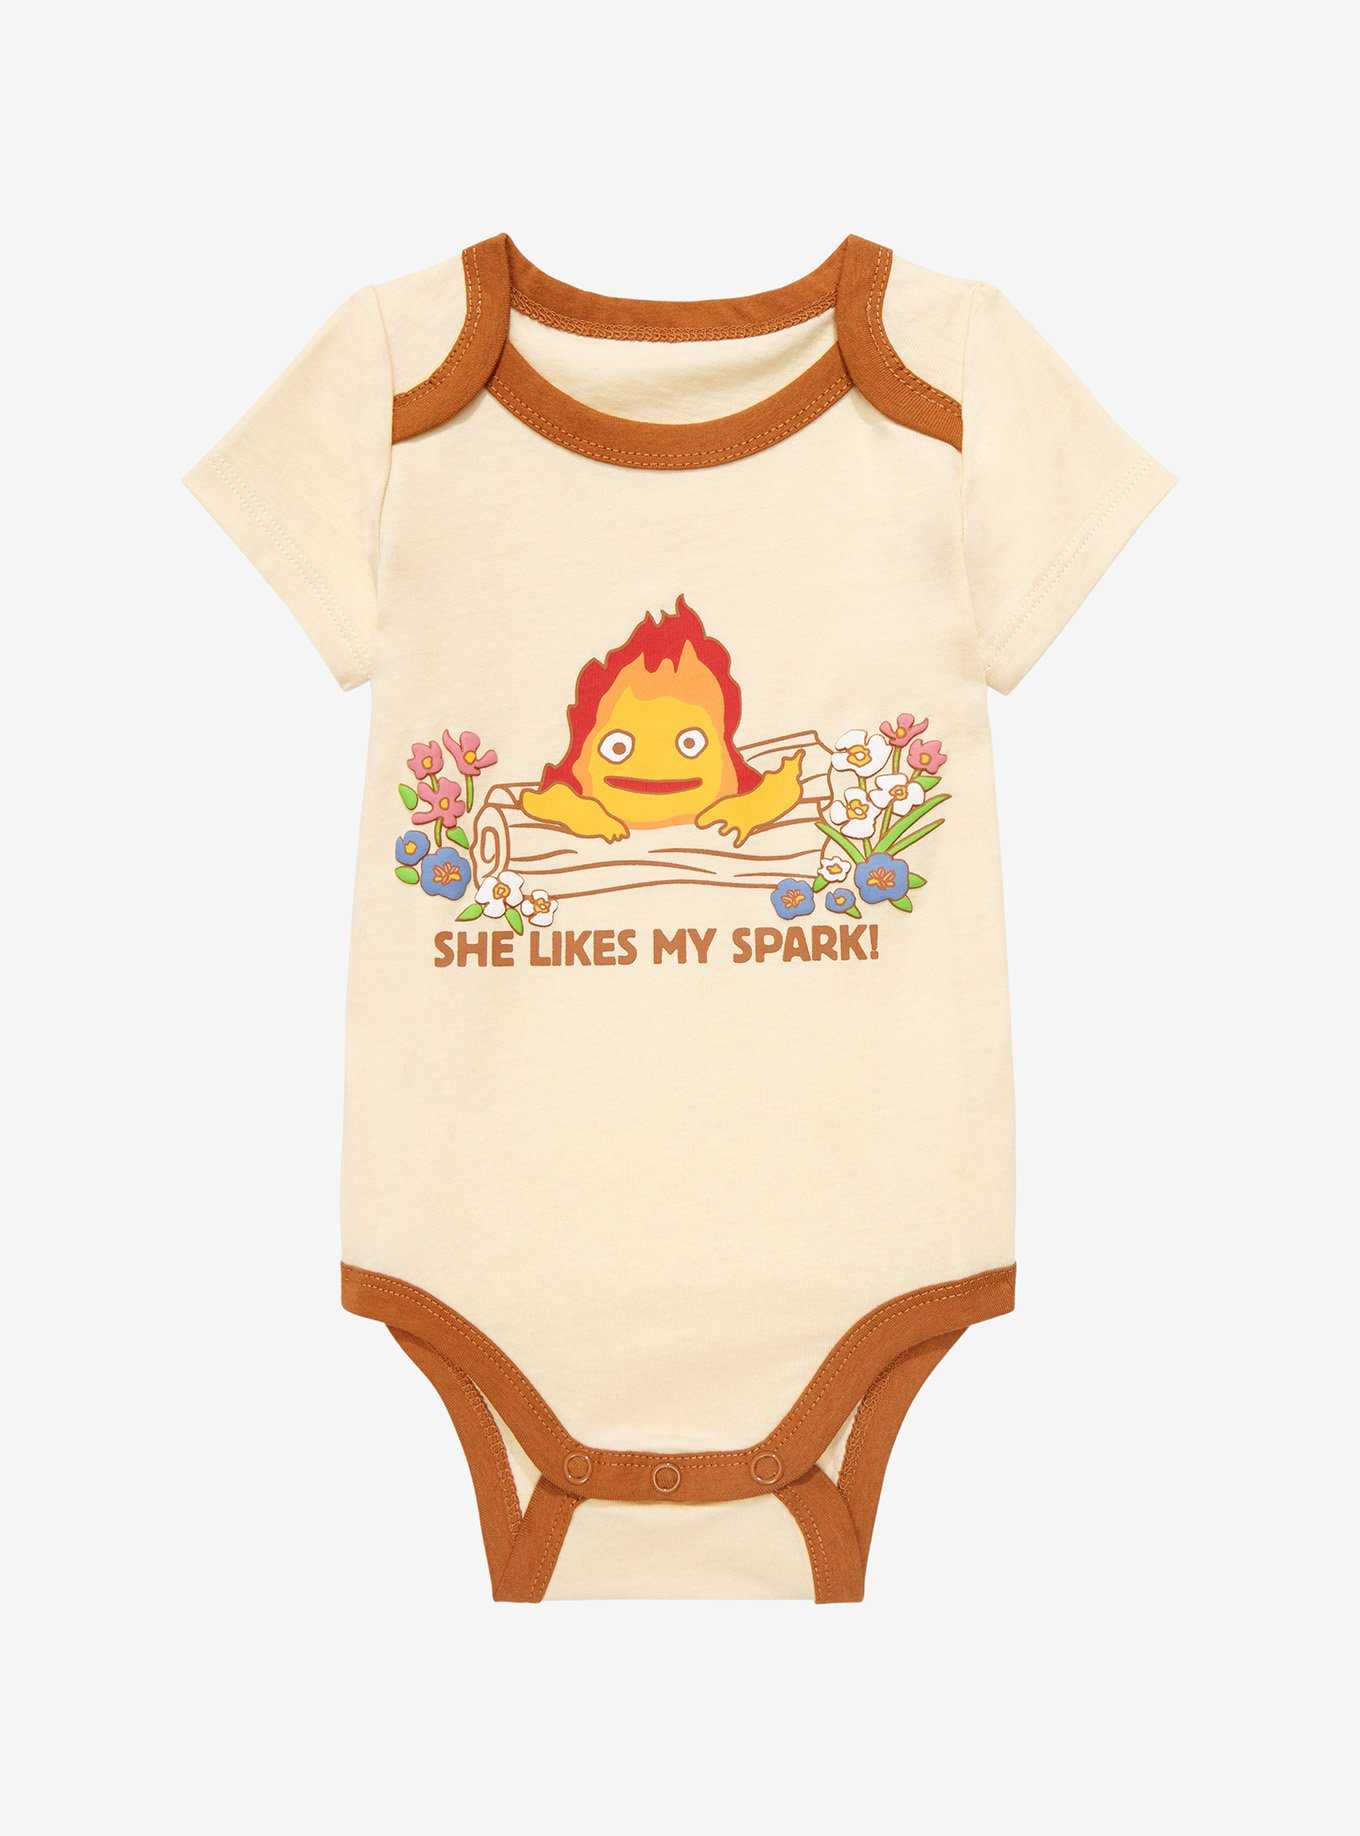 Studio Ghibli Howl's Moving Castle Calcifer Spark Infant One-Piece - BoxLunch Exclusive, , hi-res